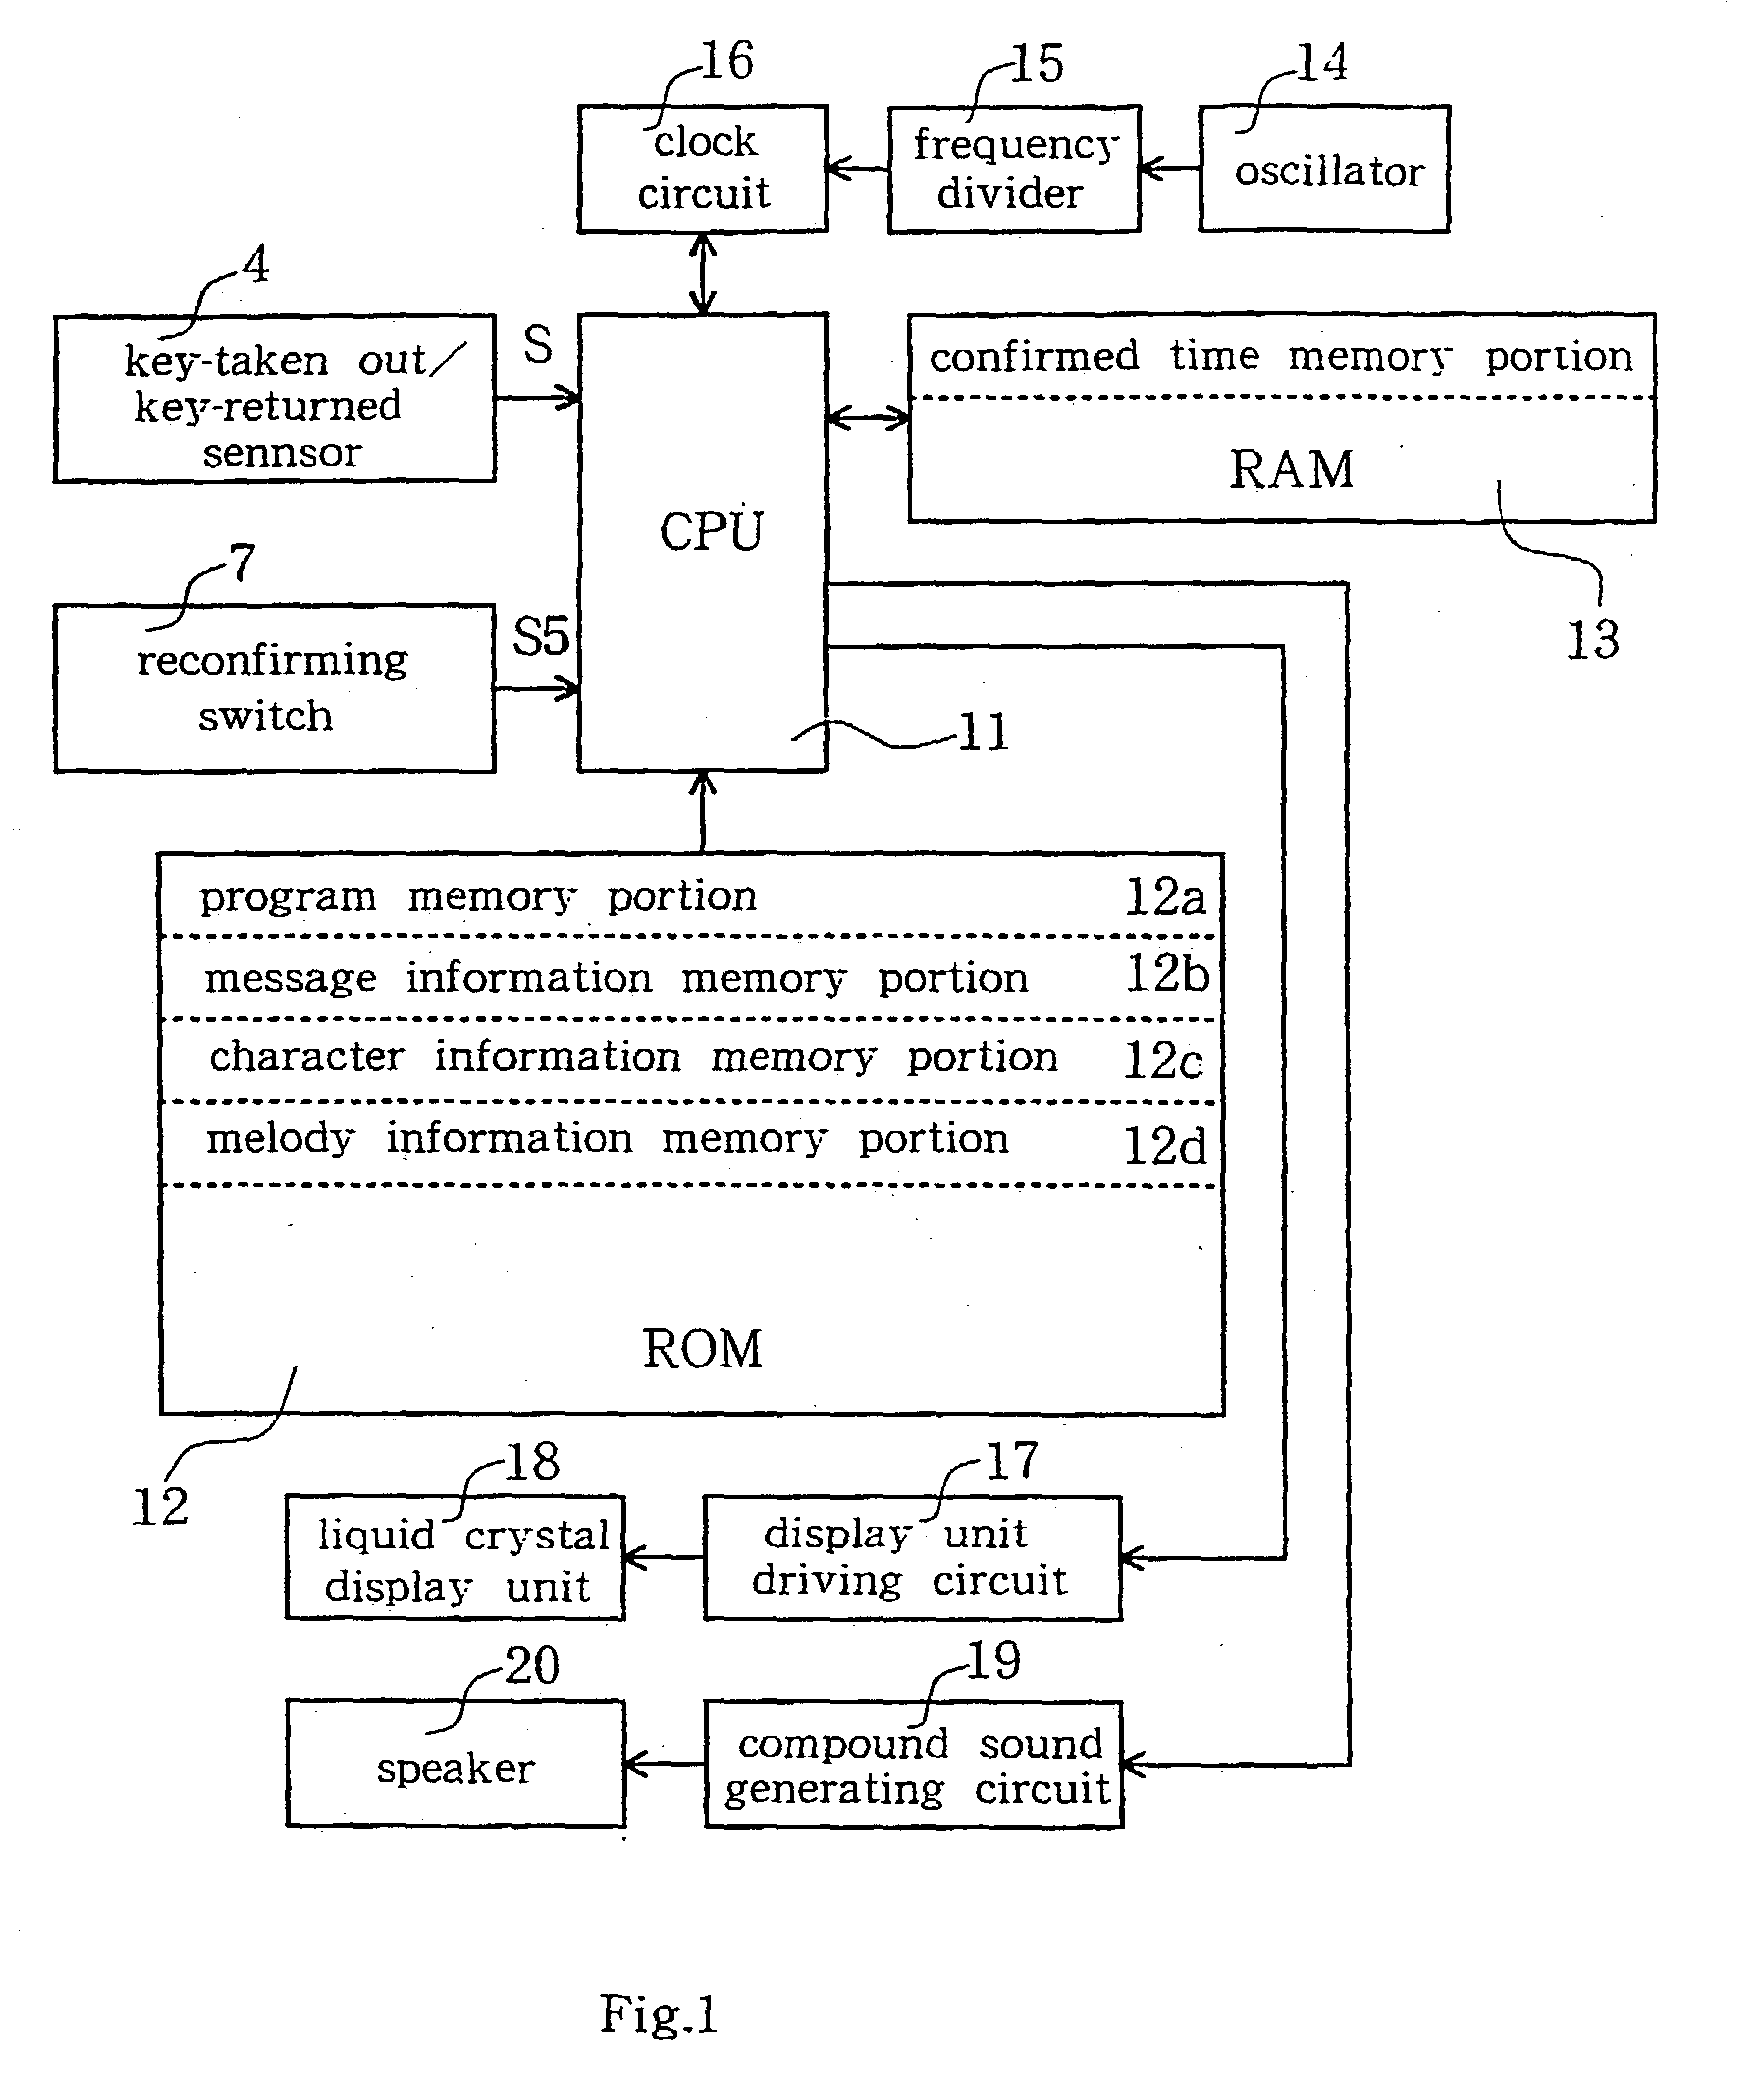 Lock-confirmation supporting device